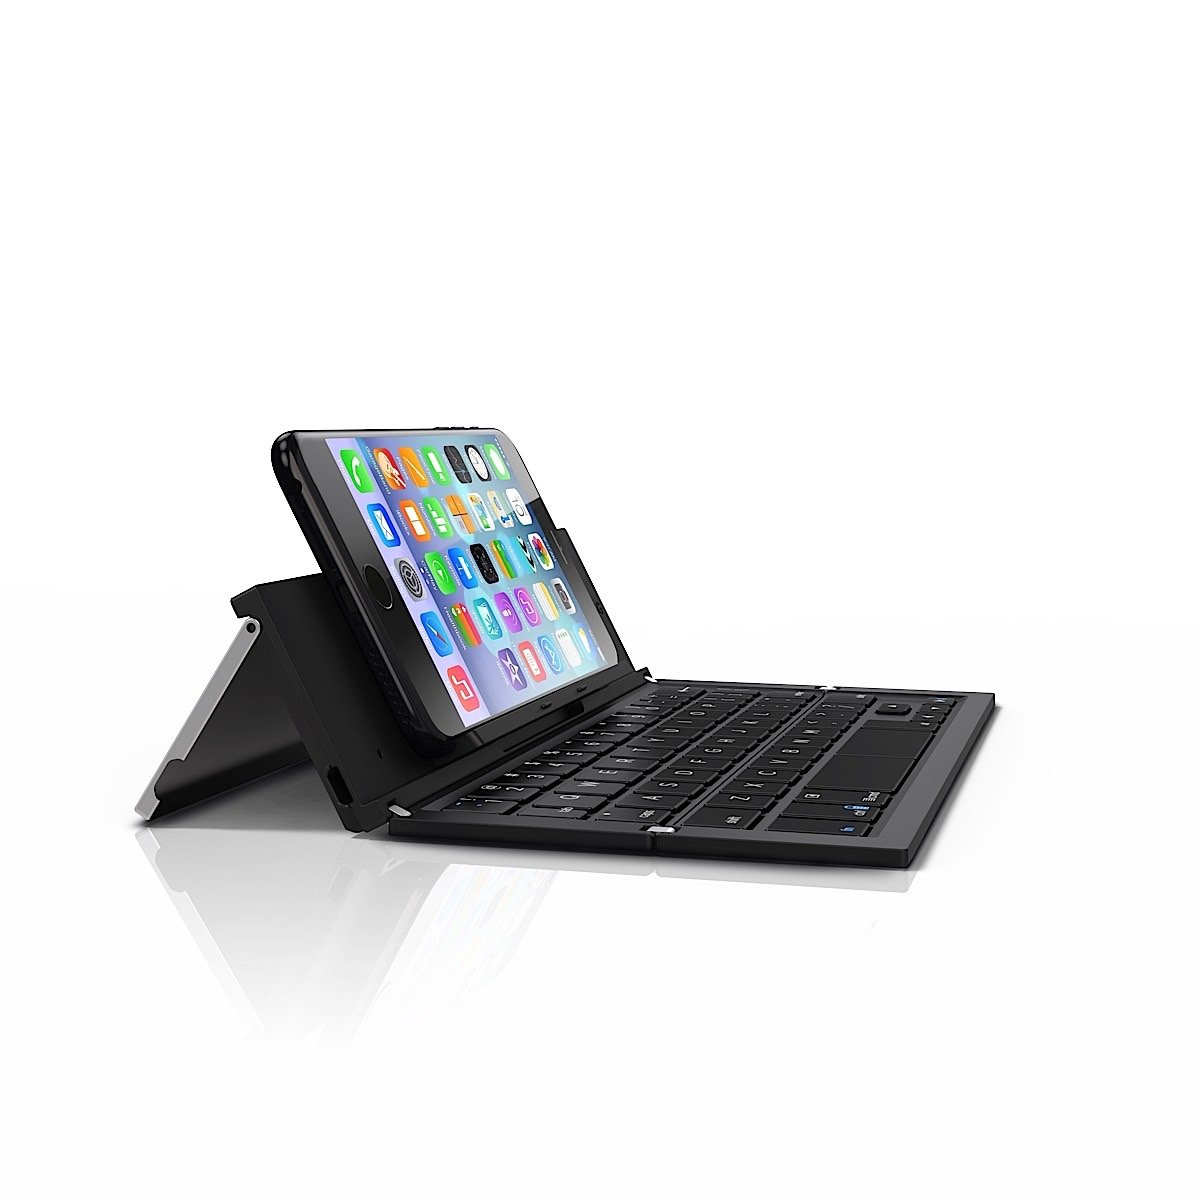 The ZAGG Pocket keyboard is designed for phablets like the iPhone 6 Plus and Galaxy Note 4.